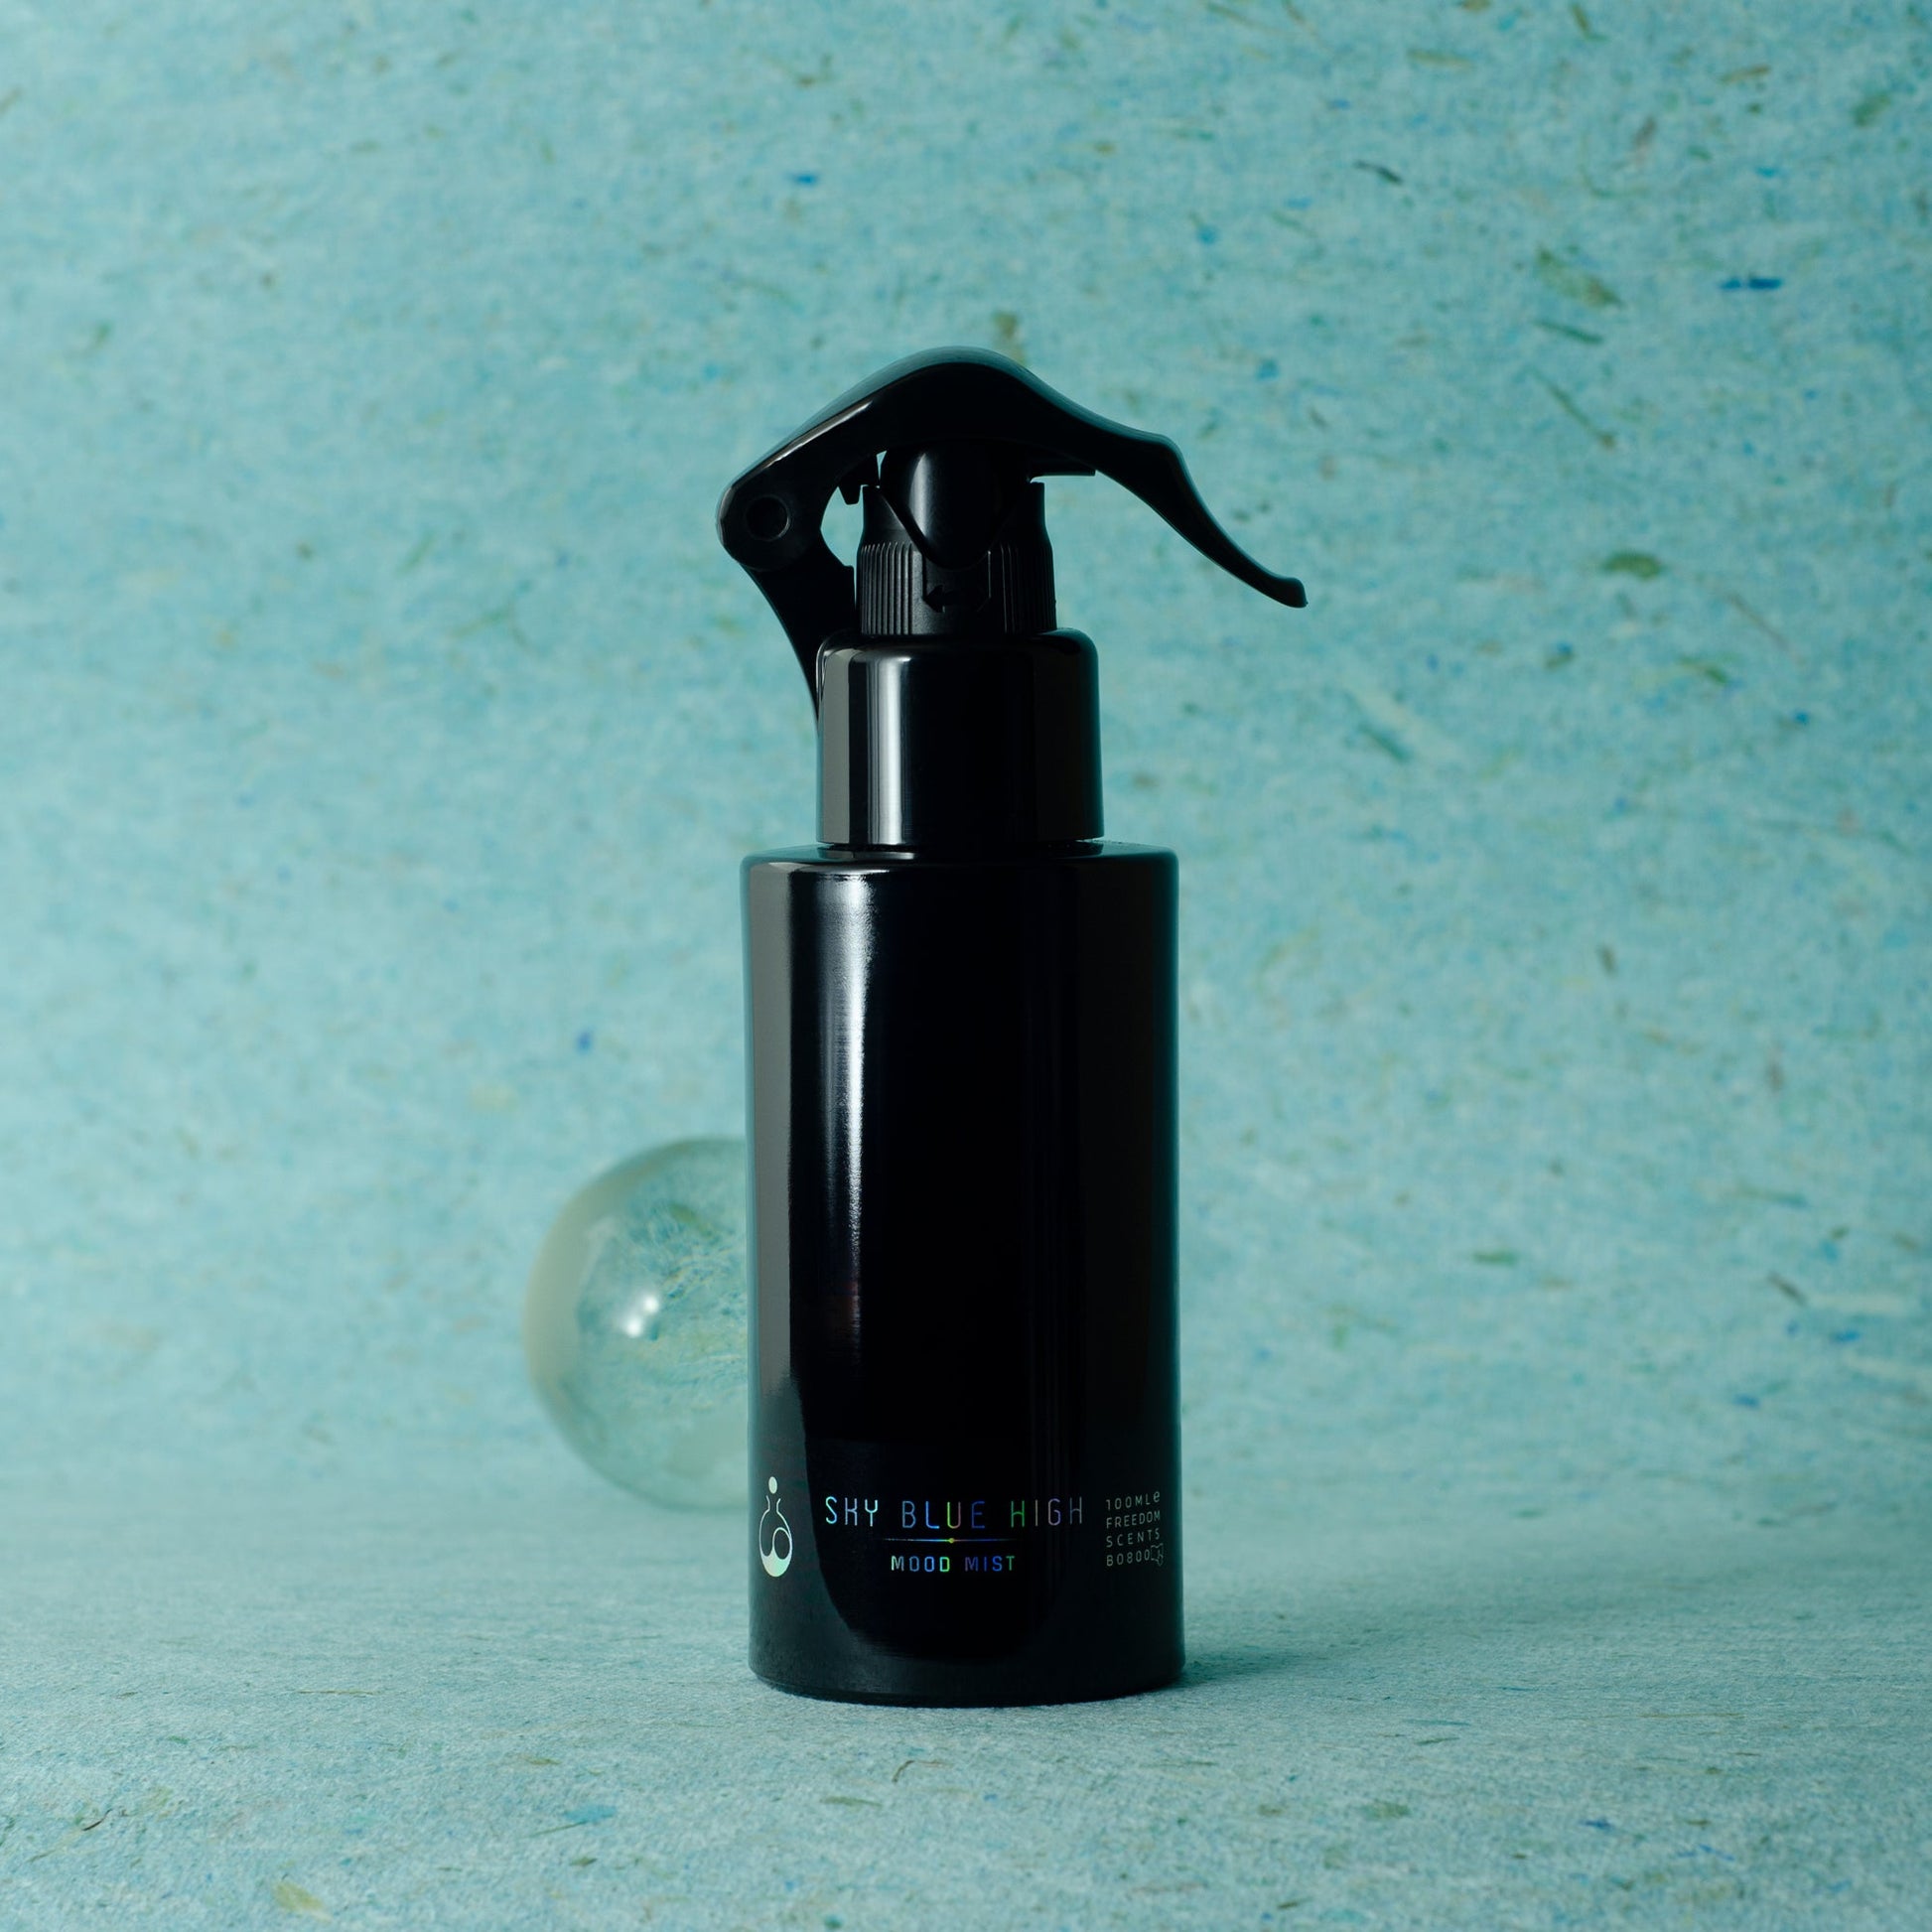 Freedom scents mood mist room pillow and linen spray pictured on a turquoise background and a small marble. A black round bottle with a black pump spray and a black label with blue and white text.